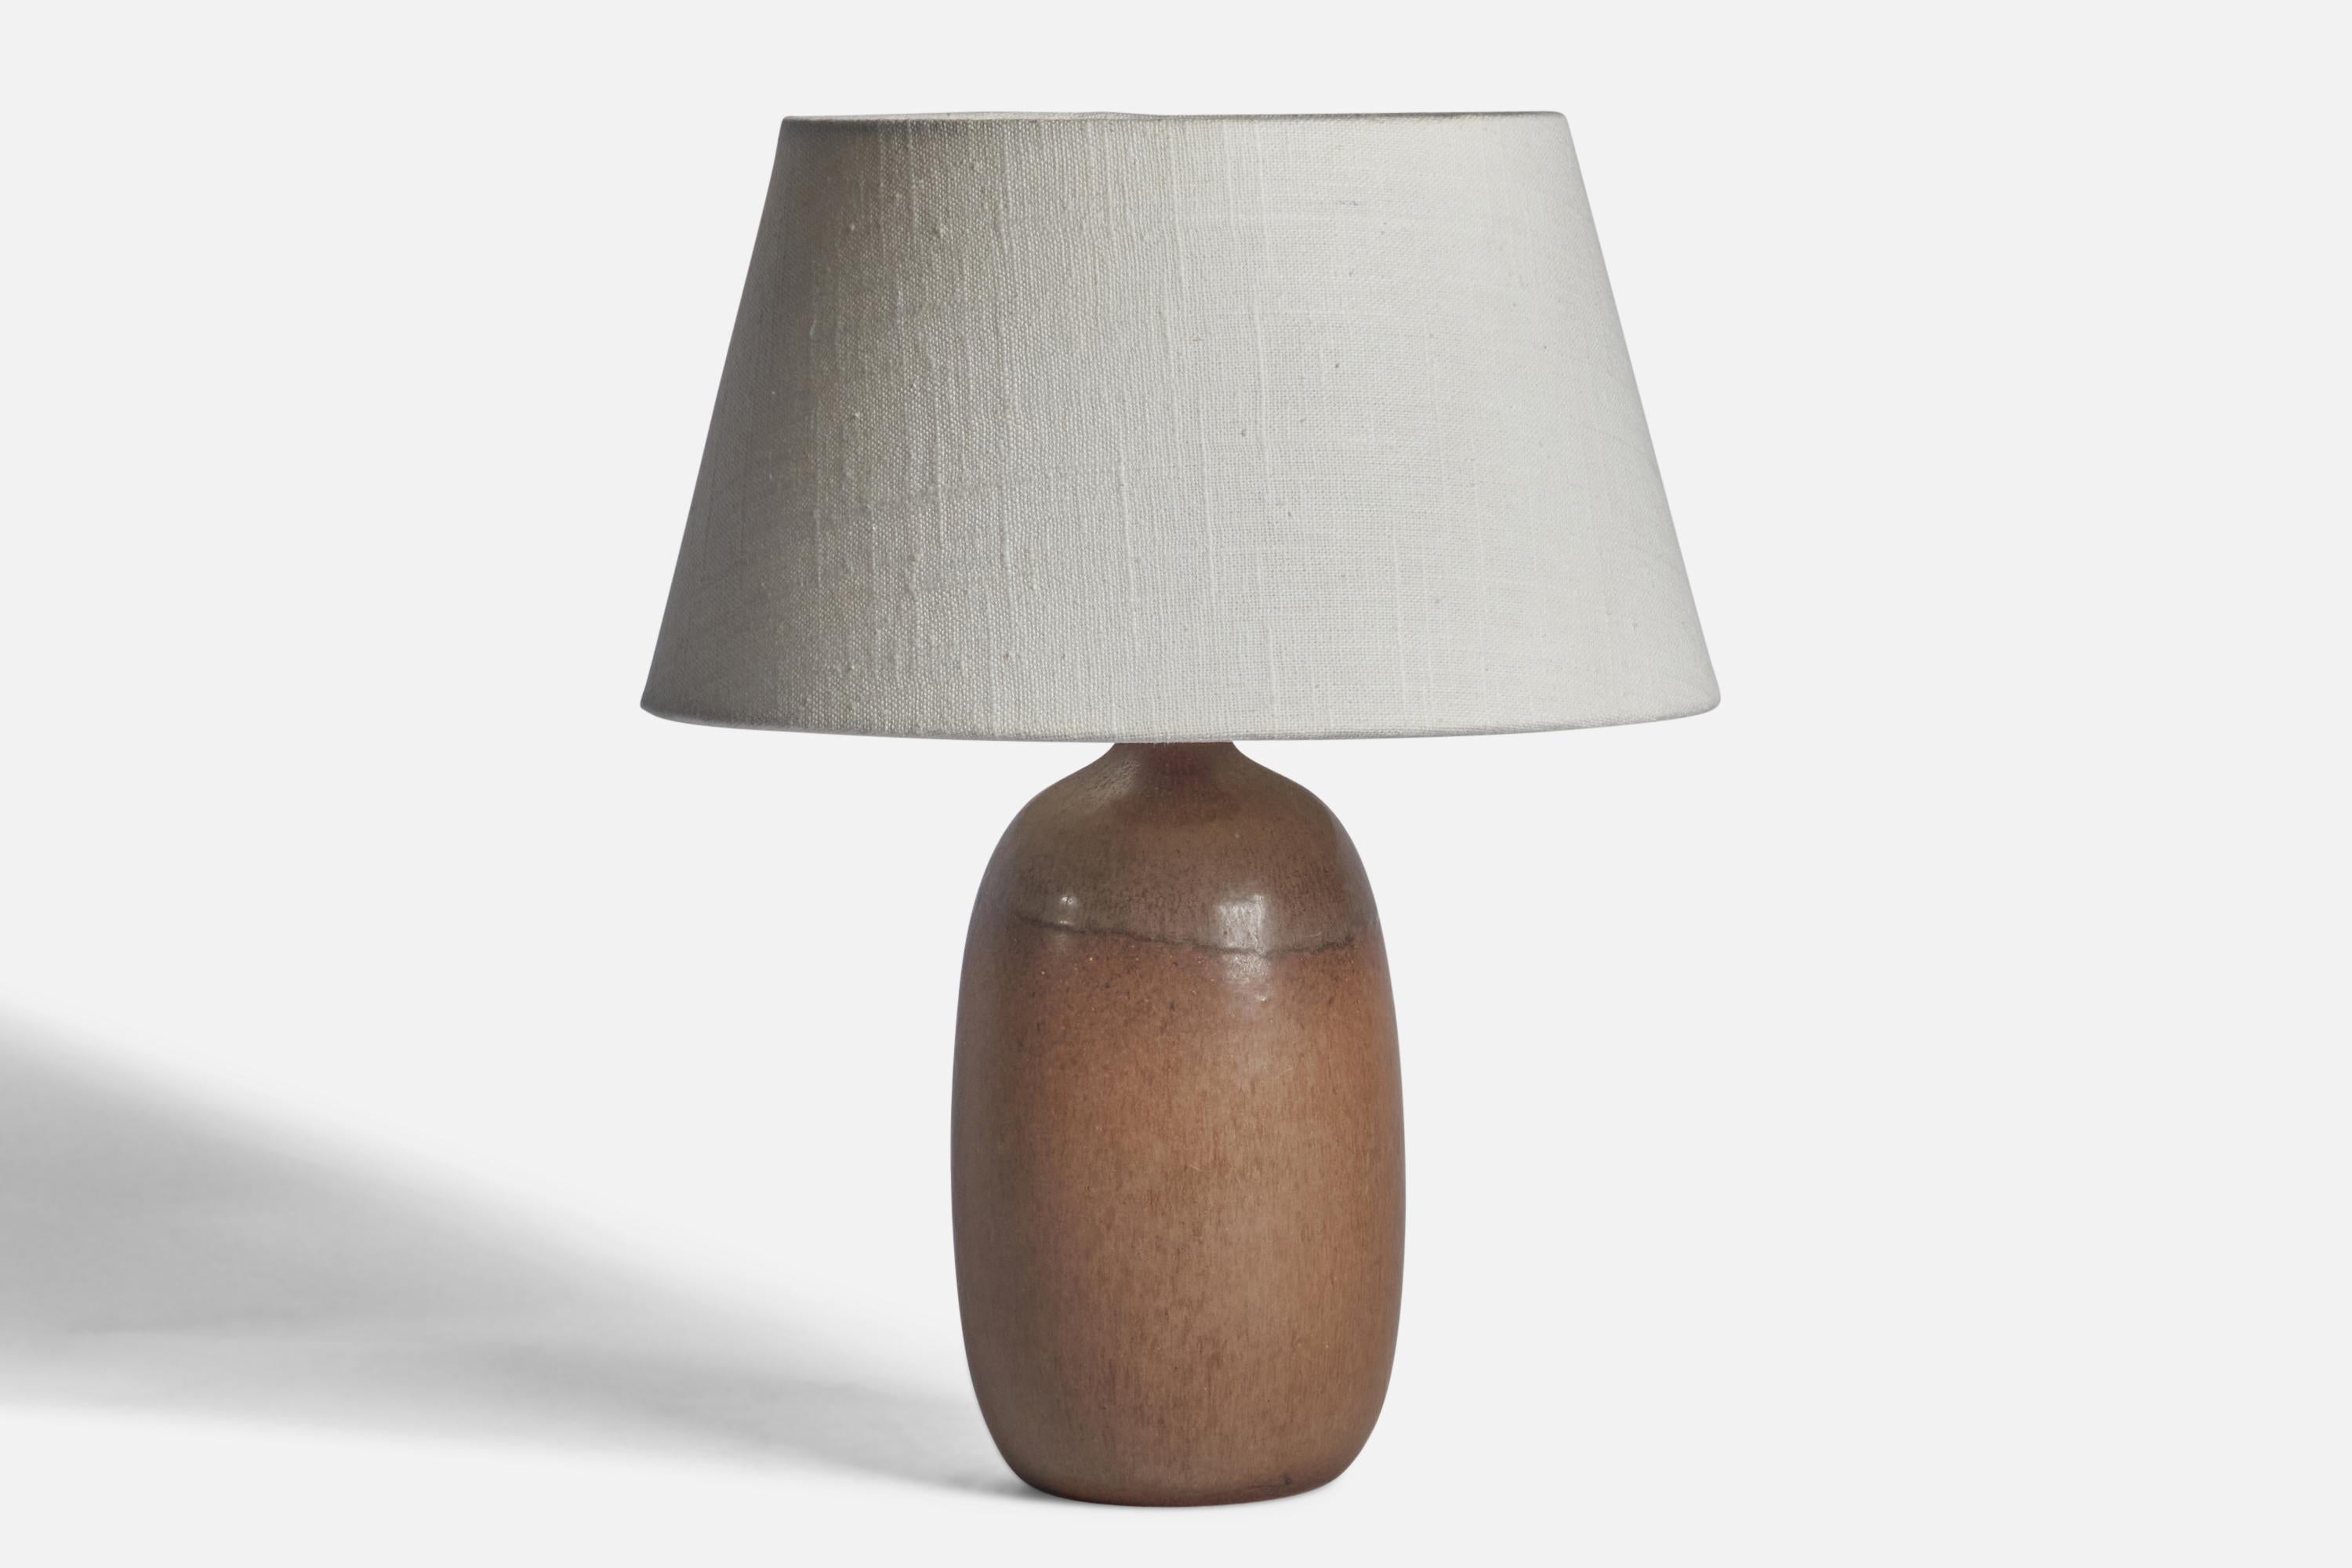 A brown-glazed stoneware table lamp designed and produced by Agne Aronsson, Sweden, 1960s.

Dimensions of Lamp (inches): 10” H x 4.15” Diameter
Dimensions of Shade (inches): 7” Top Diameter x 10” Bottom Diameter x 5.5” H 
Dimensions of Lamp with